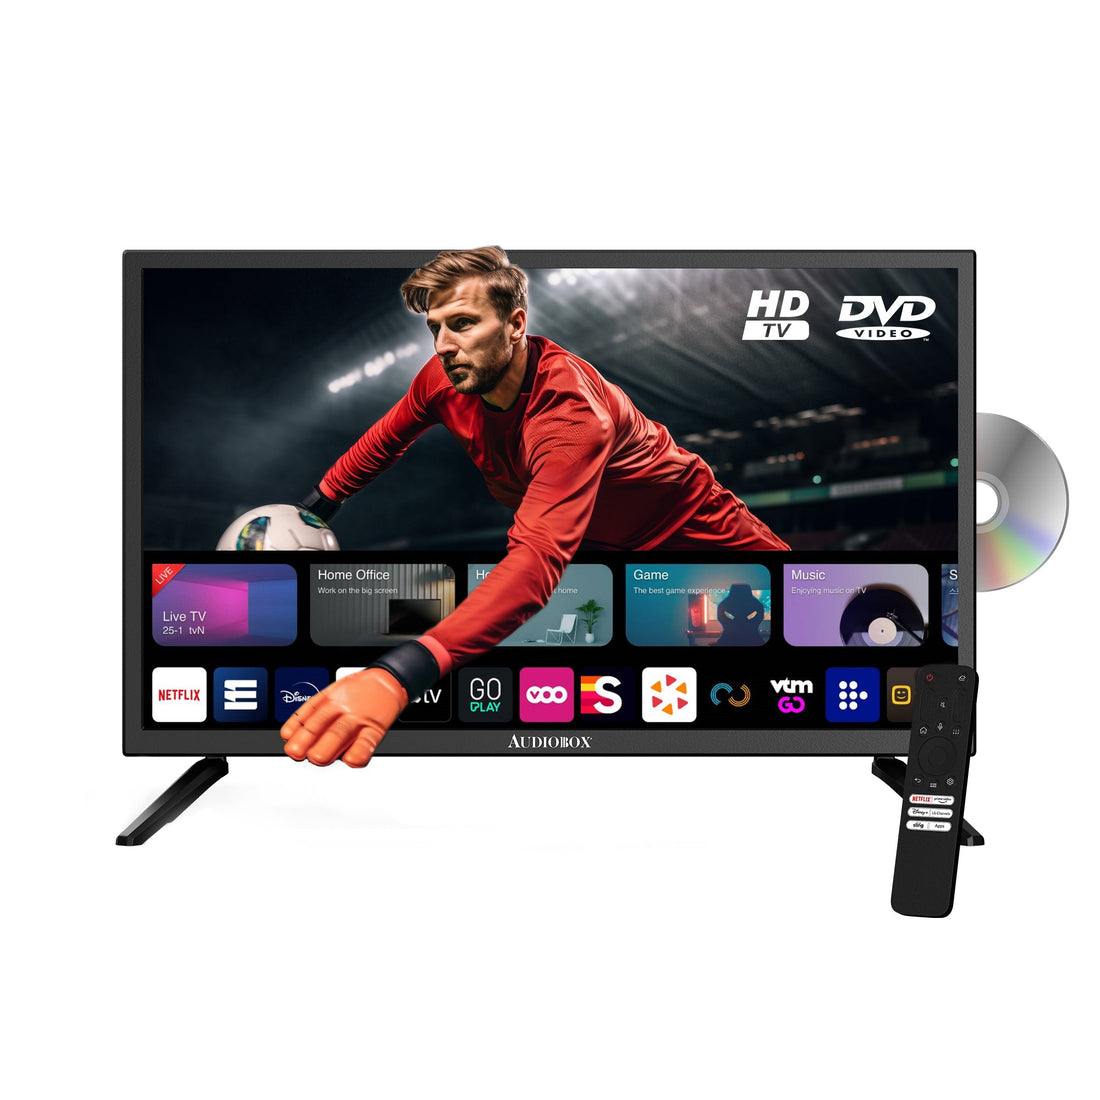 Audiobox Smart TV with Built - In DVD Player, Bluetooth Remote Control, HD LED, 12V AC/DC Compatible - Perfect for RVs, Movies, Gaming, Travel &amp; Home Entertainment, Includes HDMI &amp; USB Ports - Top ElectrosTVTV - 320SD